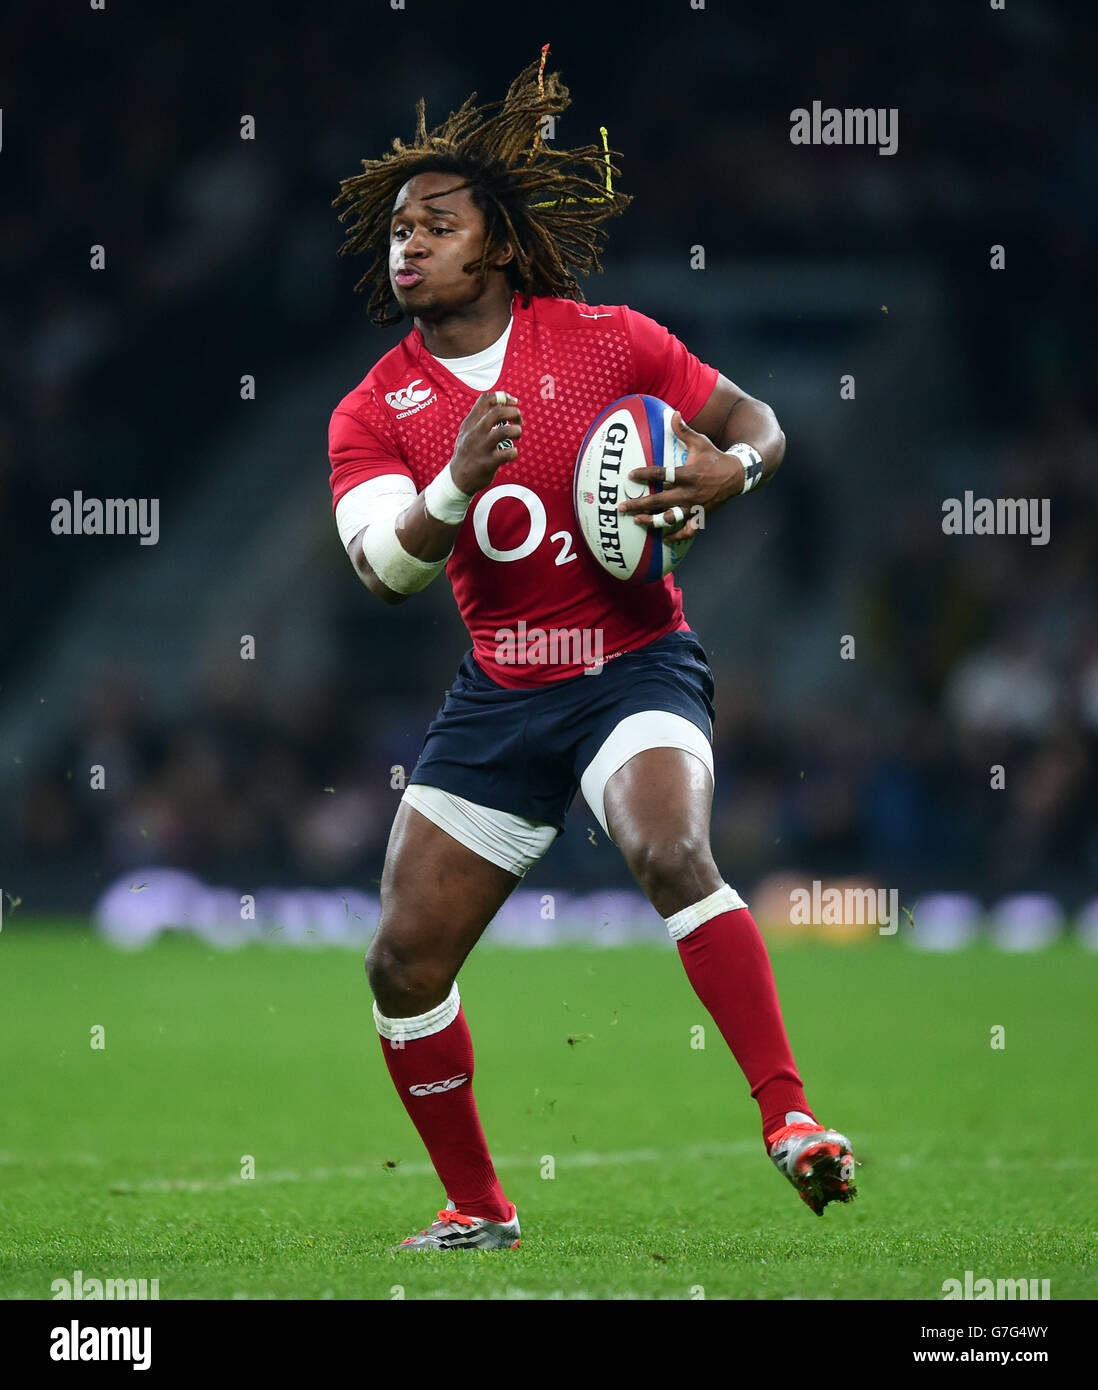 England's Marland Yarde during the QBE International match at Twickenham, London. PRESS ASSOCIATION Photo. Picture date: Saturday November 22, 2014. See PA Story RUGBYU England. Photo credit should read: Adam Davy/PA Wire. Stock Photo